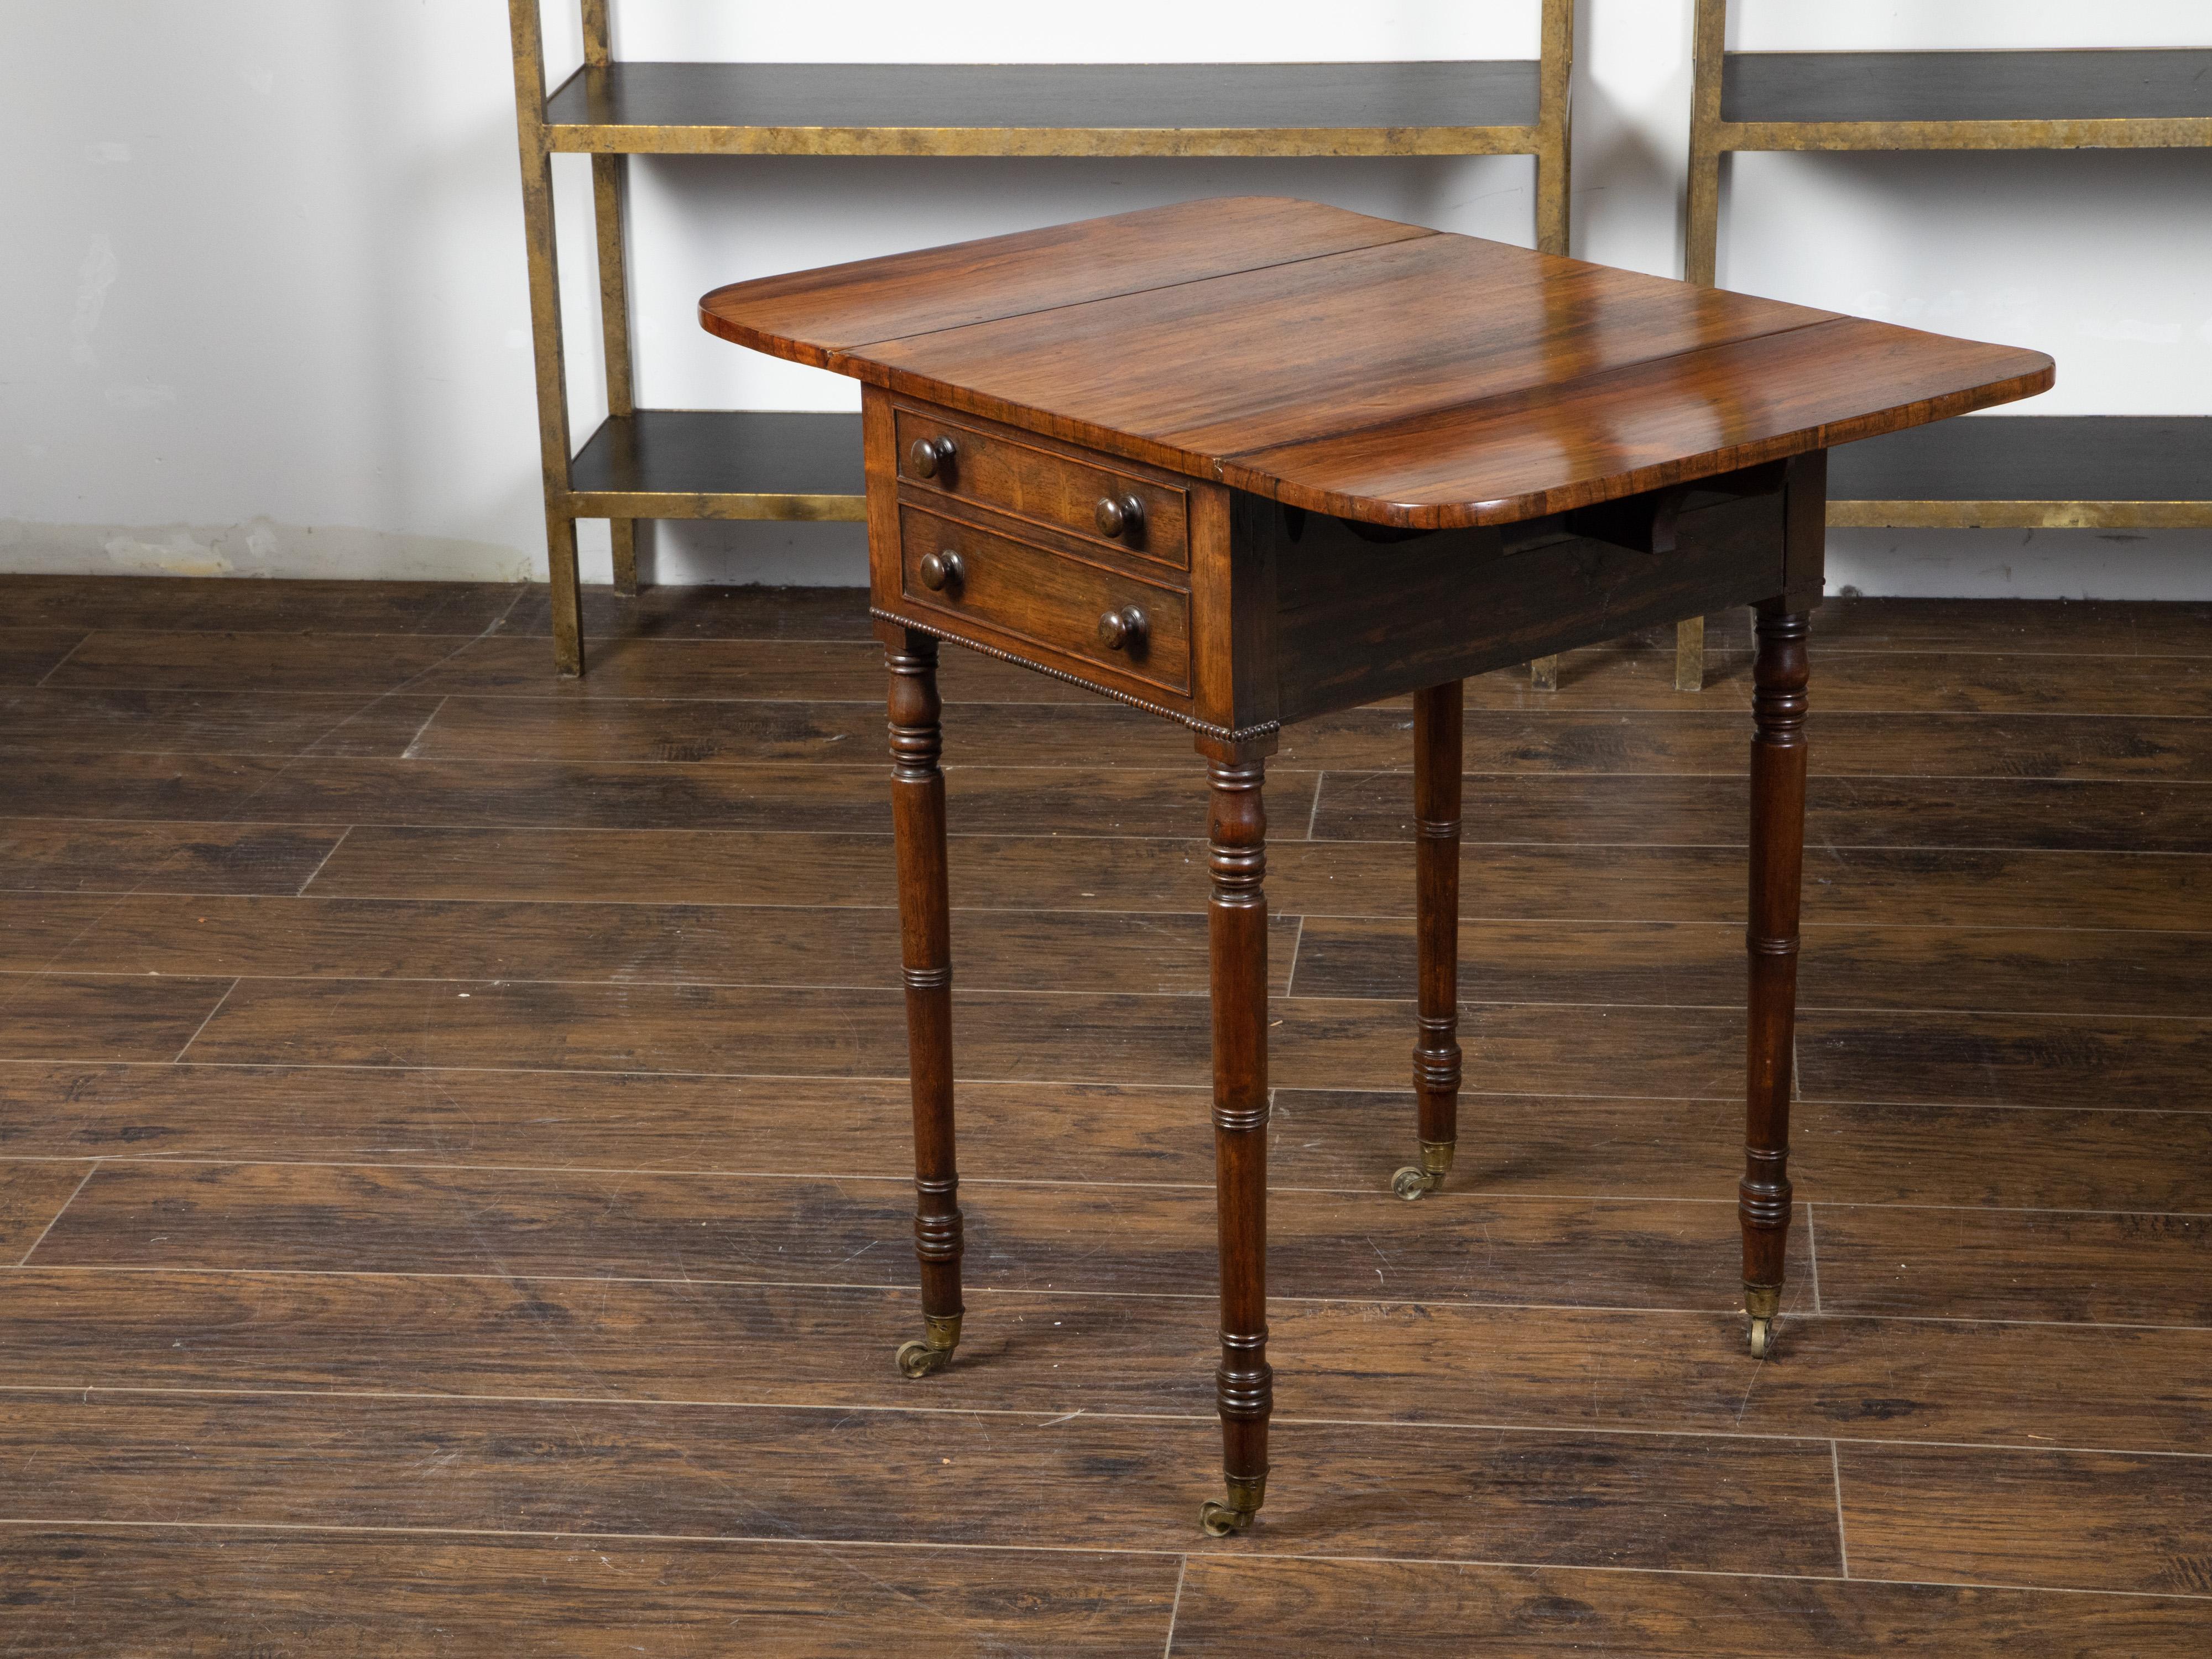 19th Century English Regency 1820s Mahogany Pembroke Table with Drop Leaves and Drawers For Sale